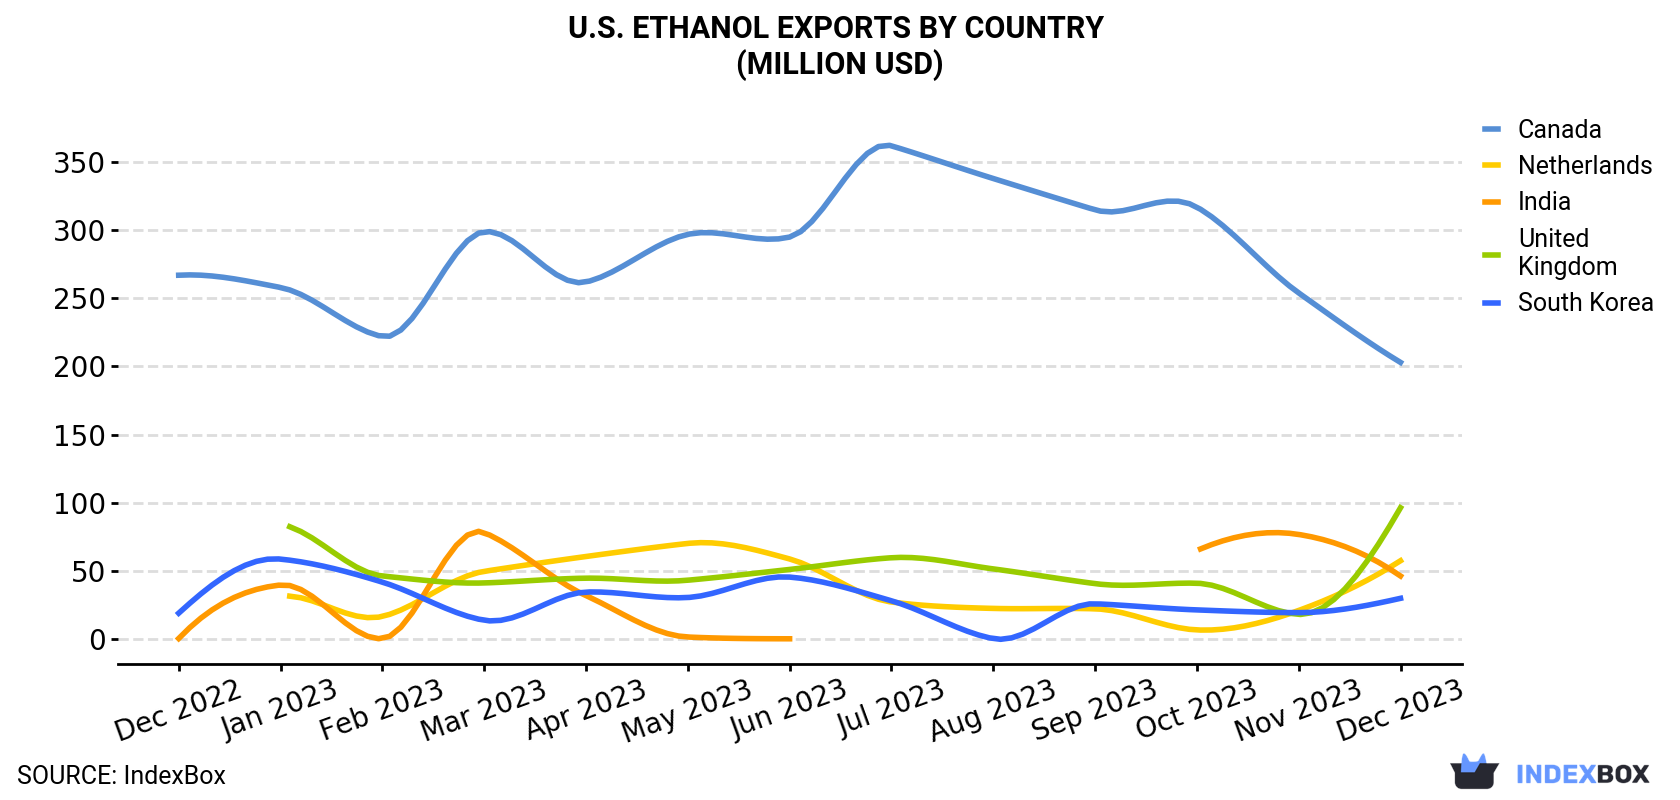 U.S. Ethanol Exports By Country (Million USD)